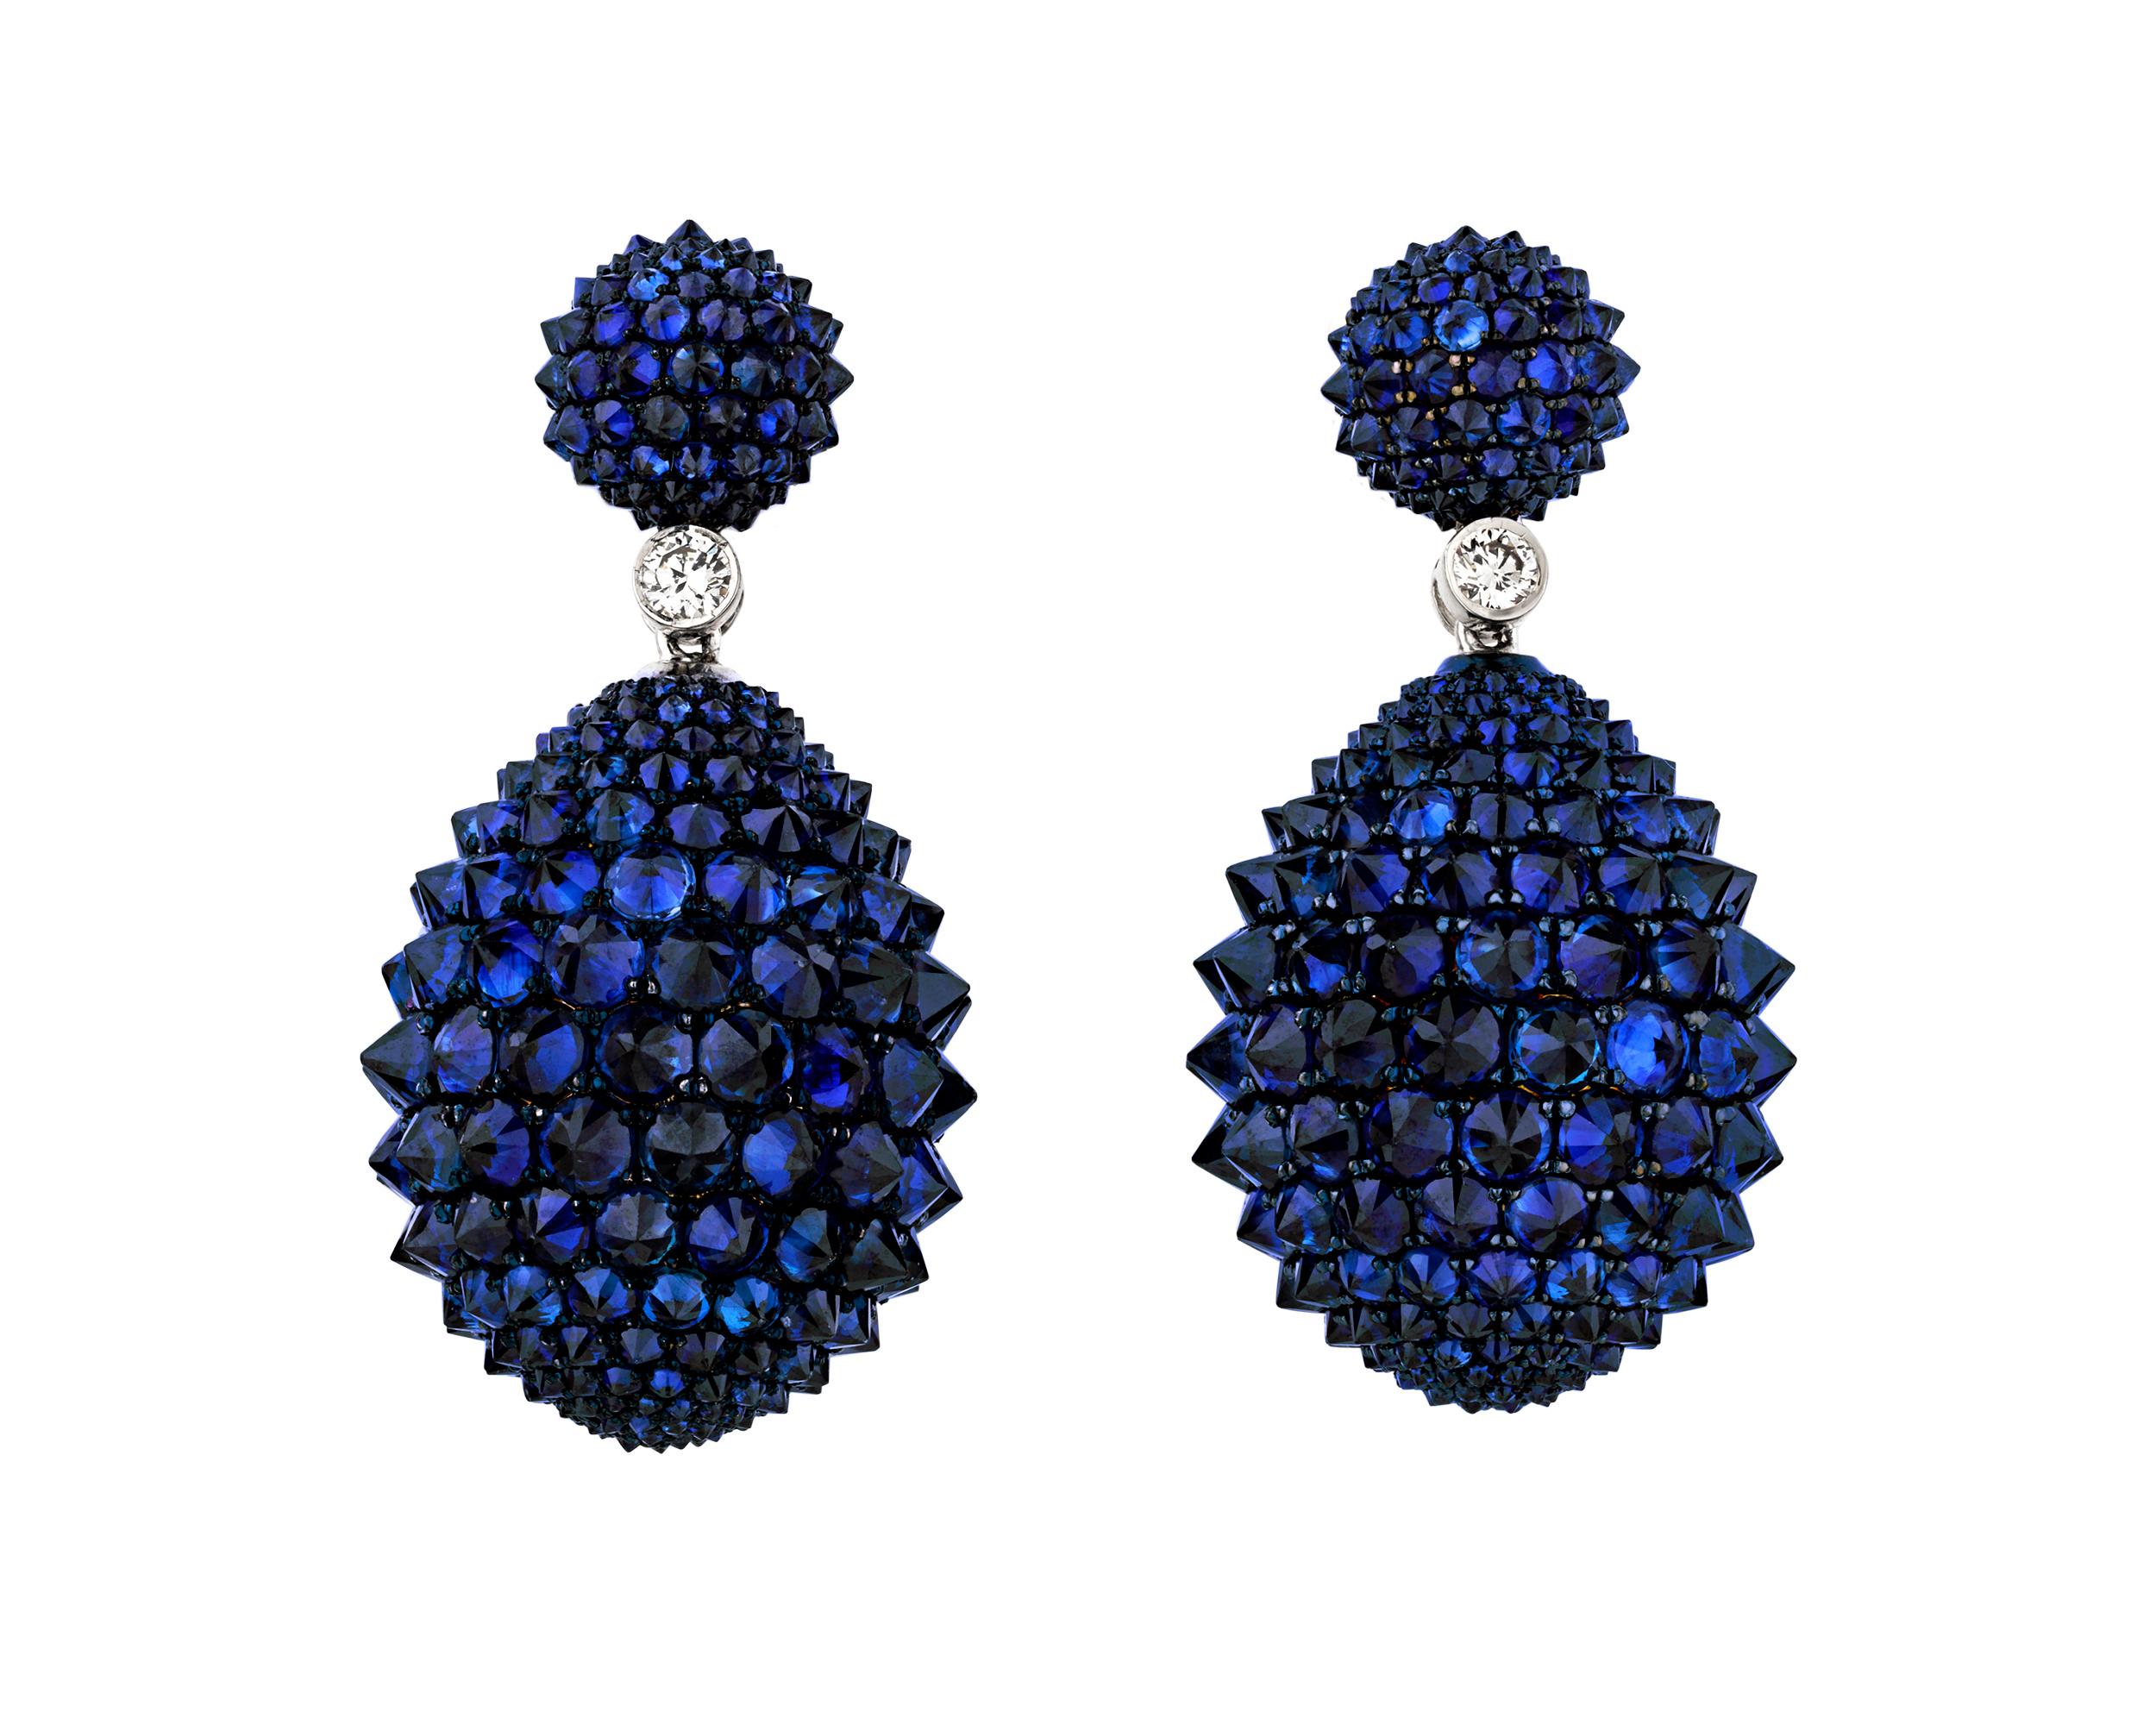 Brilliant sapphires lend an air of luxury to these statement-making earrings. Dozens of sapphires give the earrings their deep blue color while white diamond accents and a bold spiked design brings an unexpected modernity. Set in 14K white gold.

1